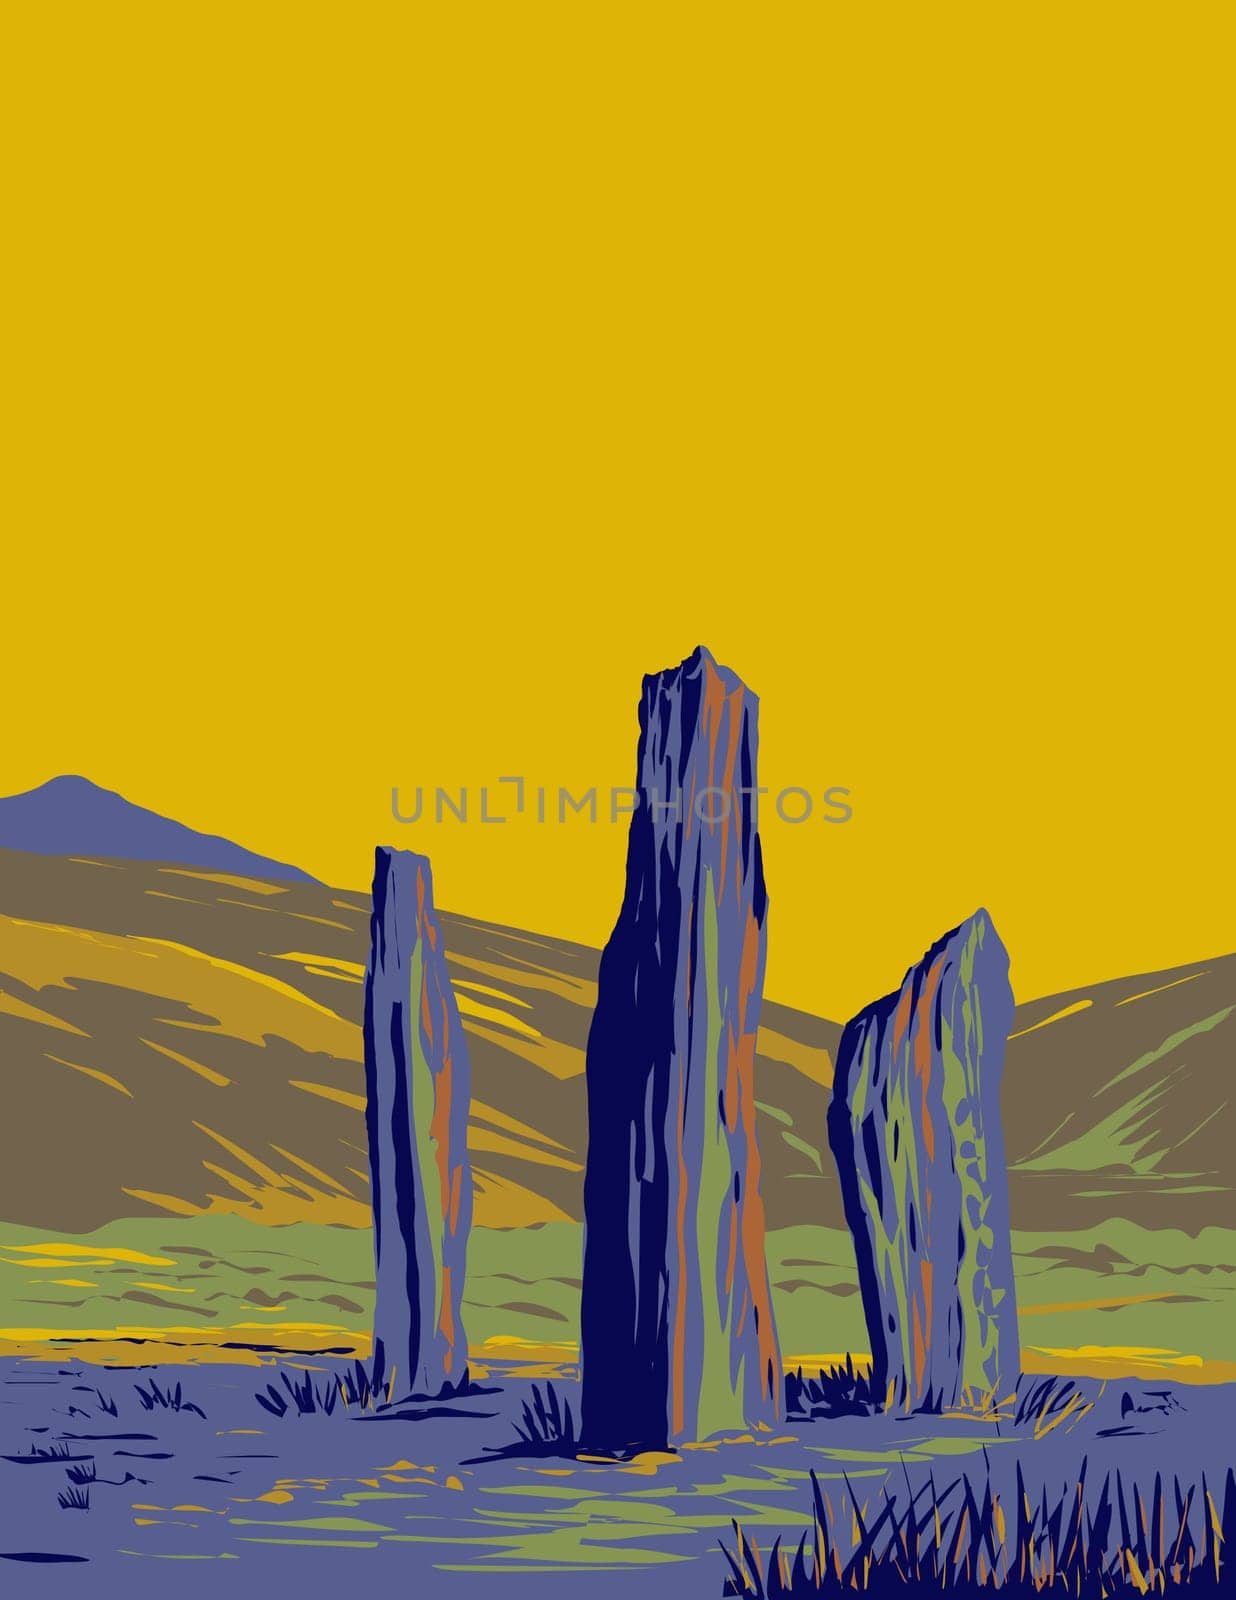 WPA poster art of the Standing Stones on Machrie Moor in the Isle of Arran in Scotland done in works project administration or federal art project style.